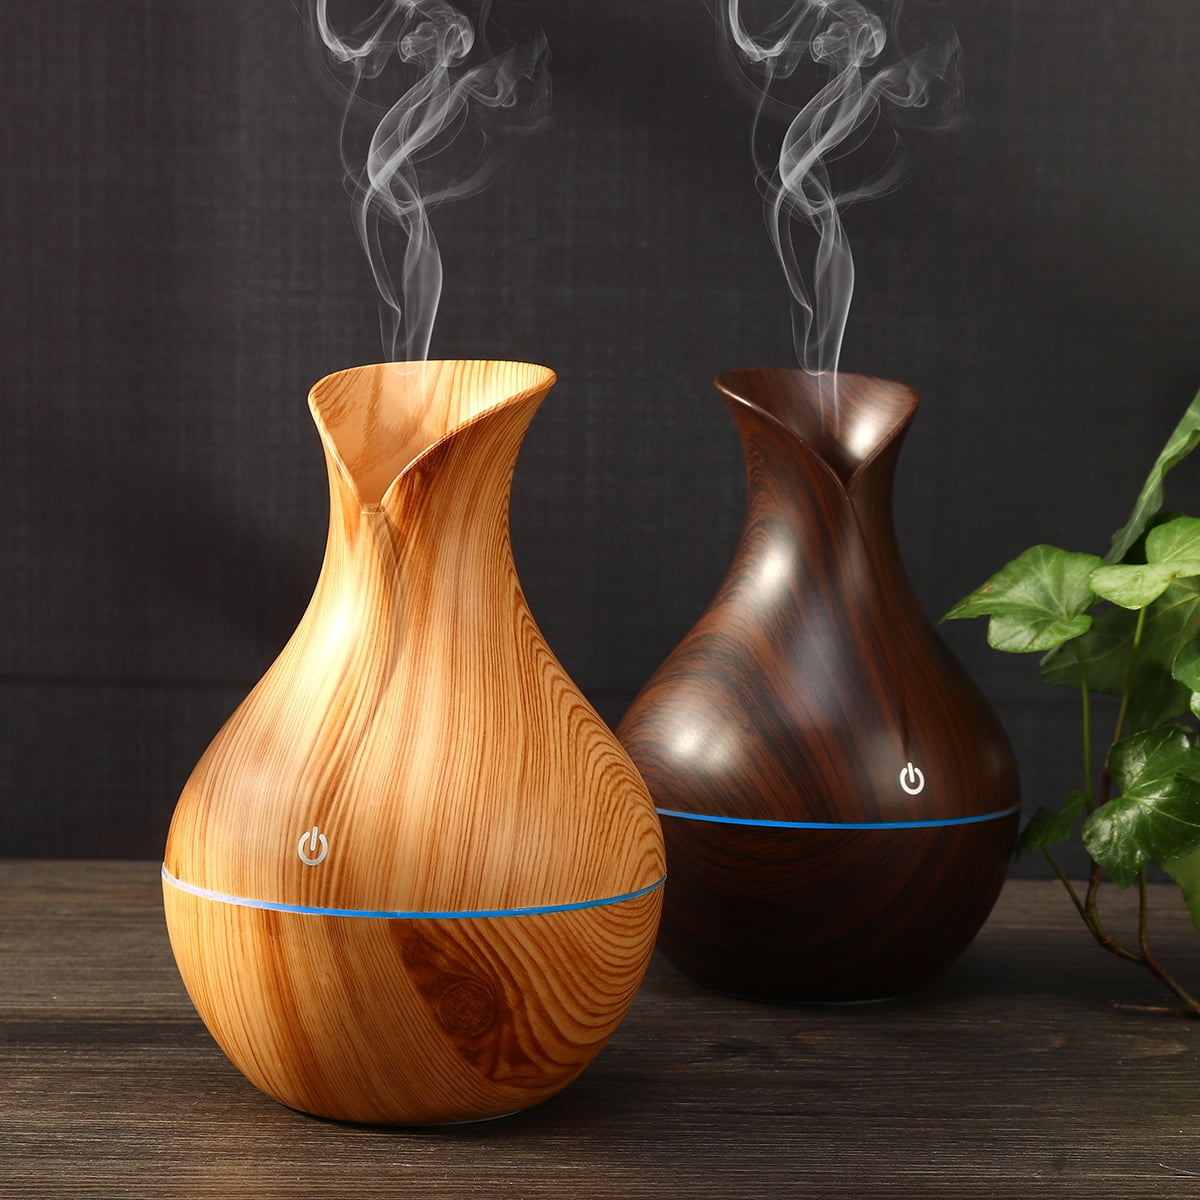 7 Color LED USB Wood Grain Ultrasonic Air Humidifier Aromatherapy Diffuser 